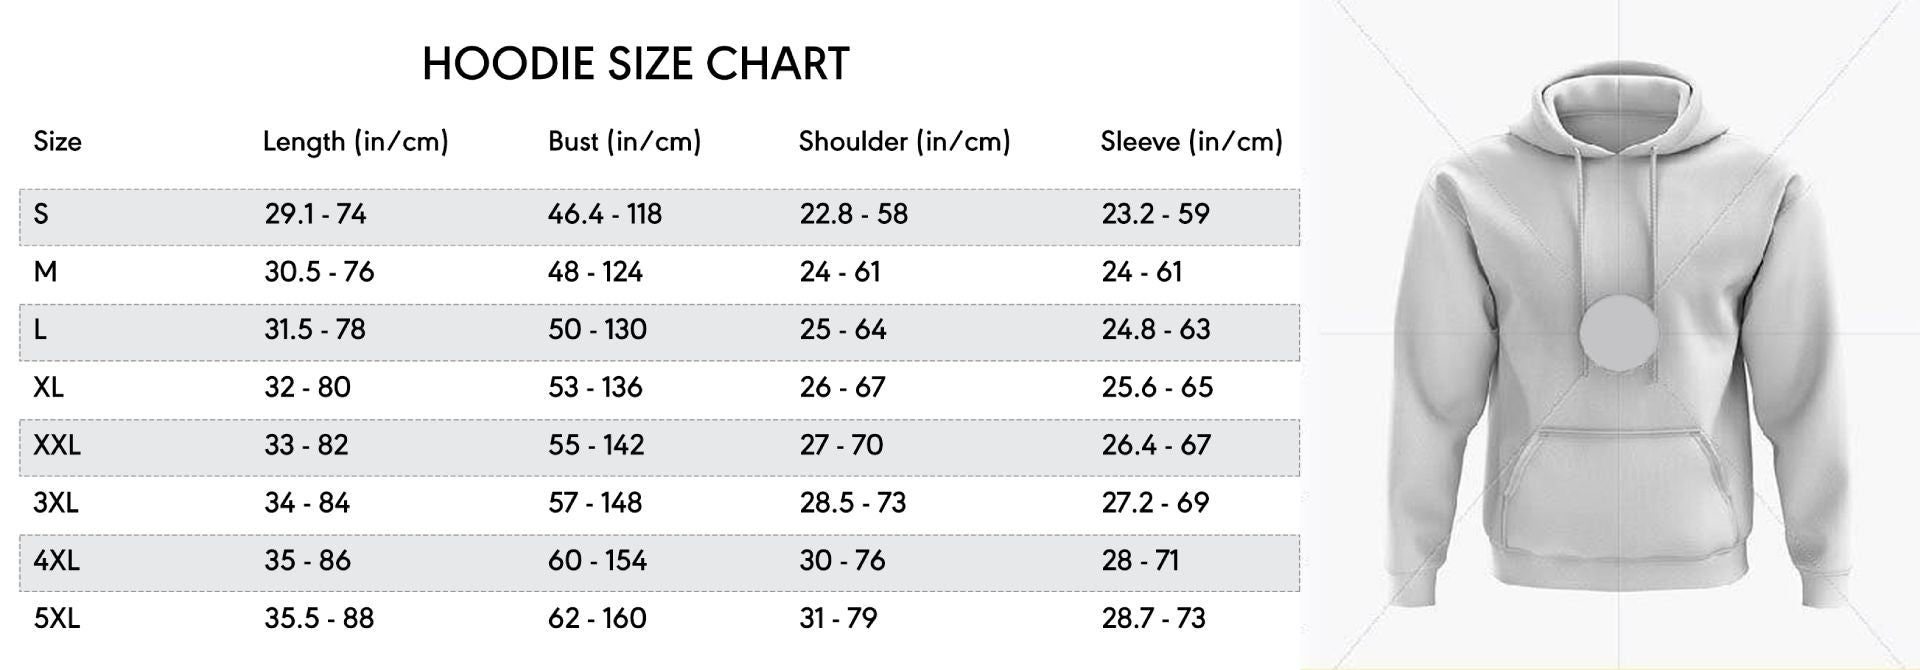 AoT Merch hoodie size guide